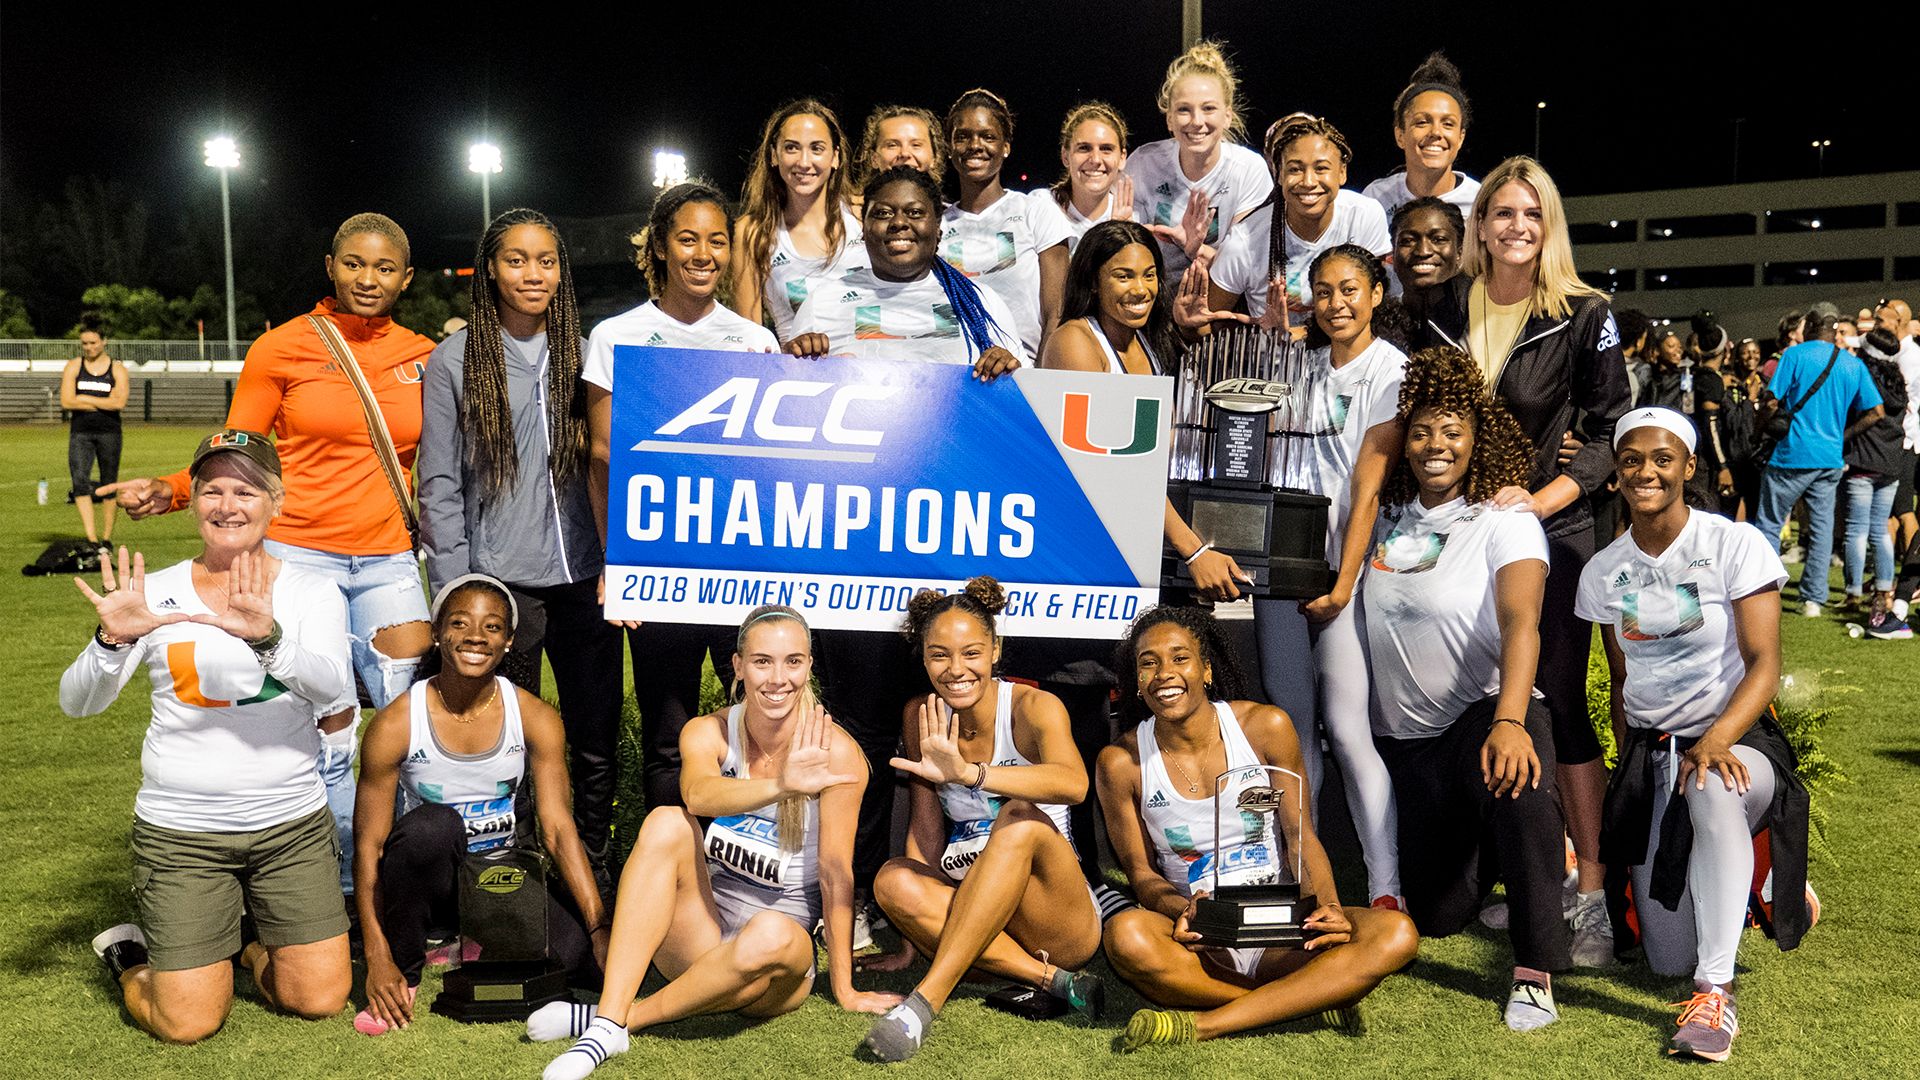 Women’s Track Defends Its Turf to Win ACC Championship